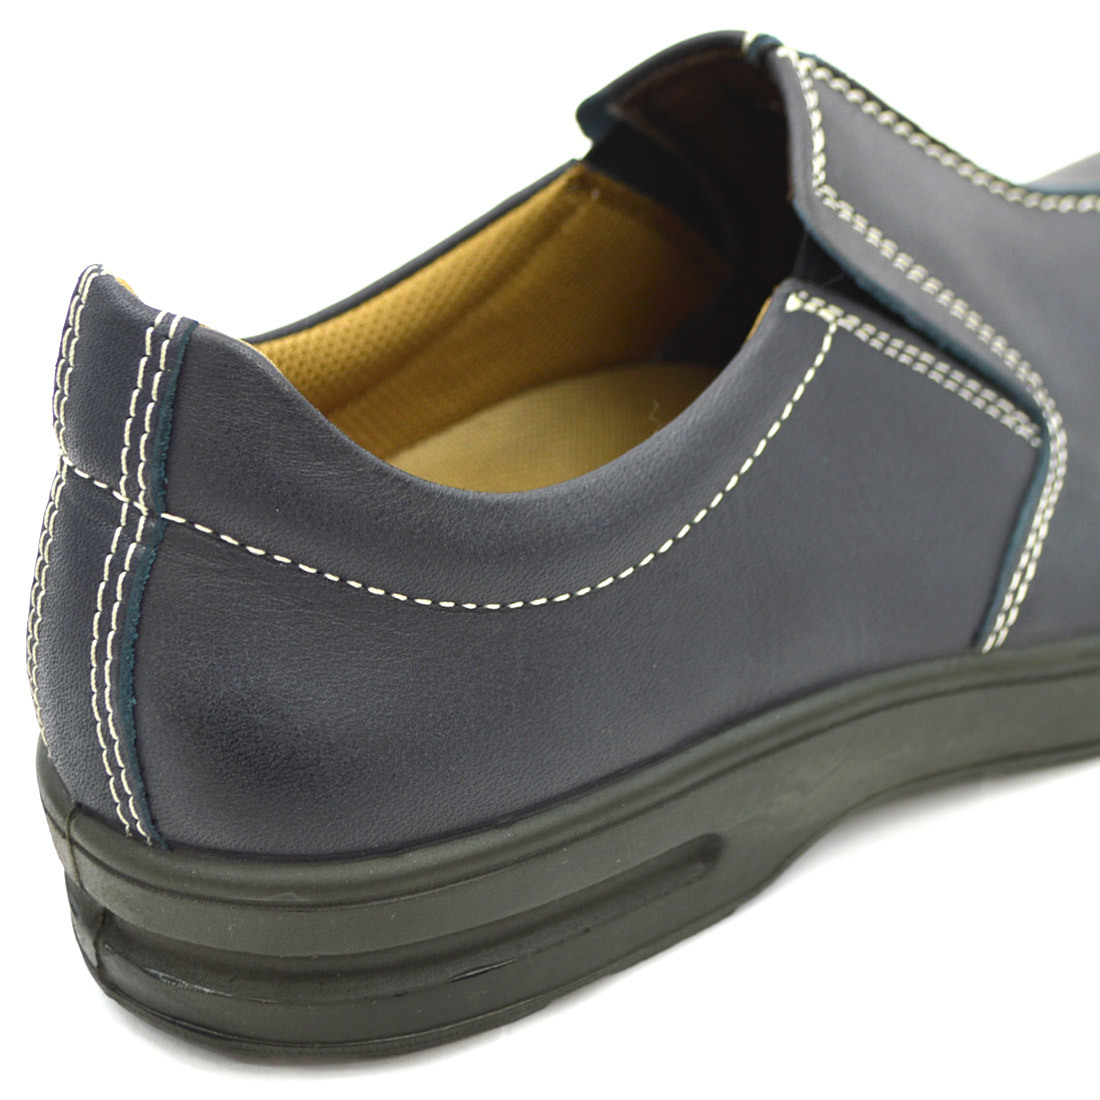 ^BOBSON Bobson casual shoes walking slip-on shoes 4509 original leather made in Japan navy Navy navy blue 25.0cm (0910010564-na-s250)